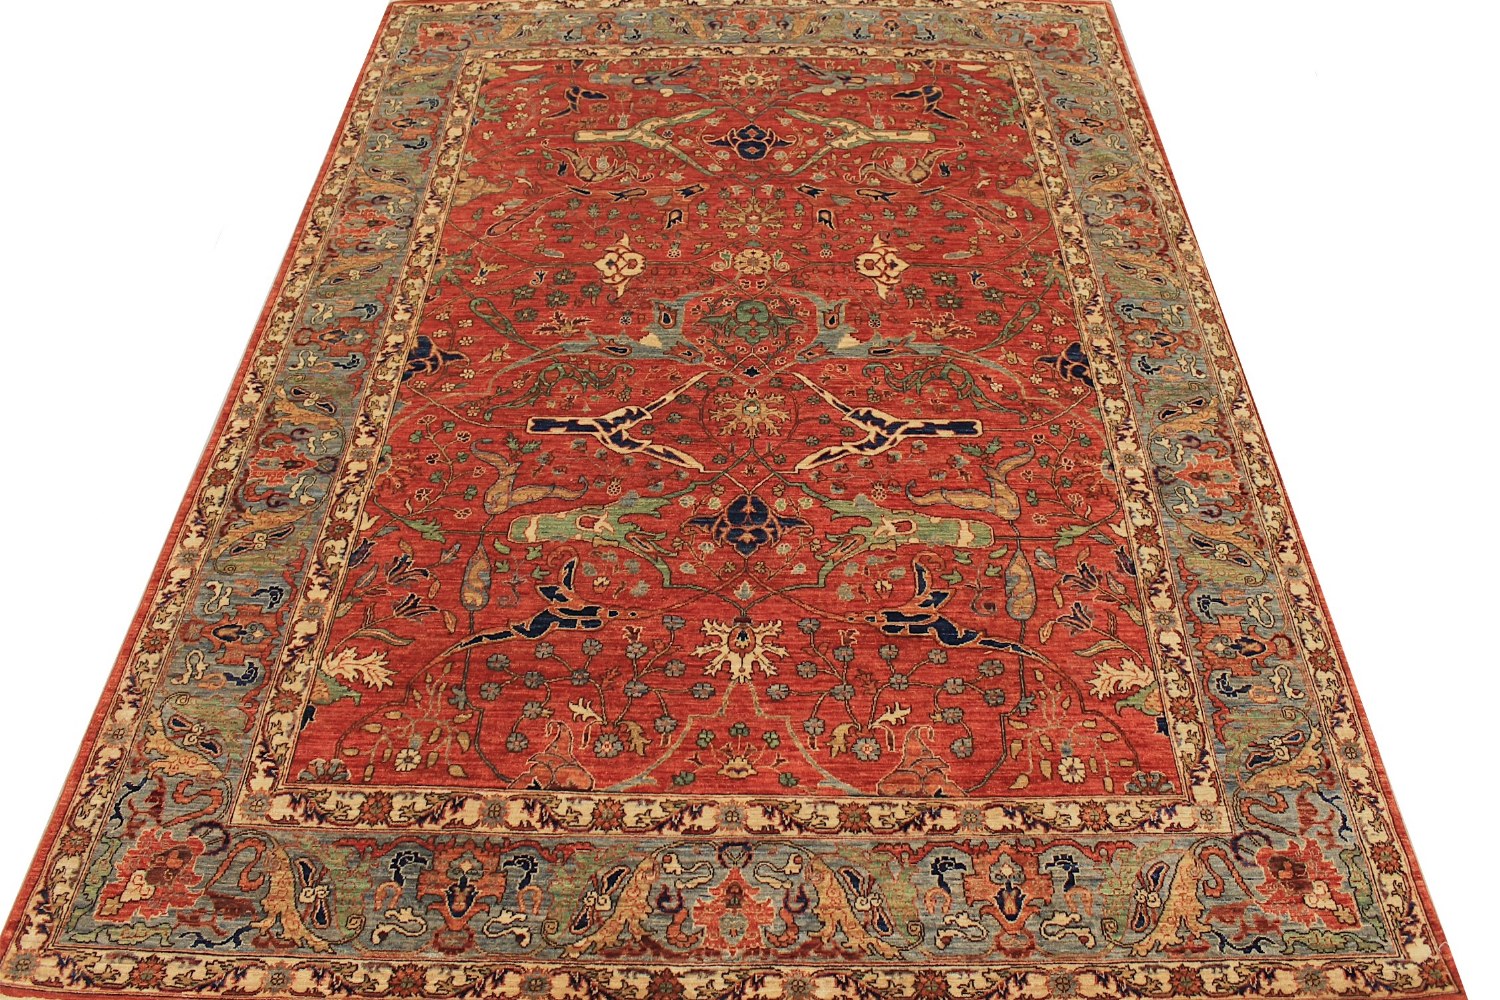 9x12 Aryana & Antique Revivals Hand Knotted Wool Area Rug - MR028855